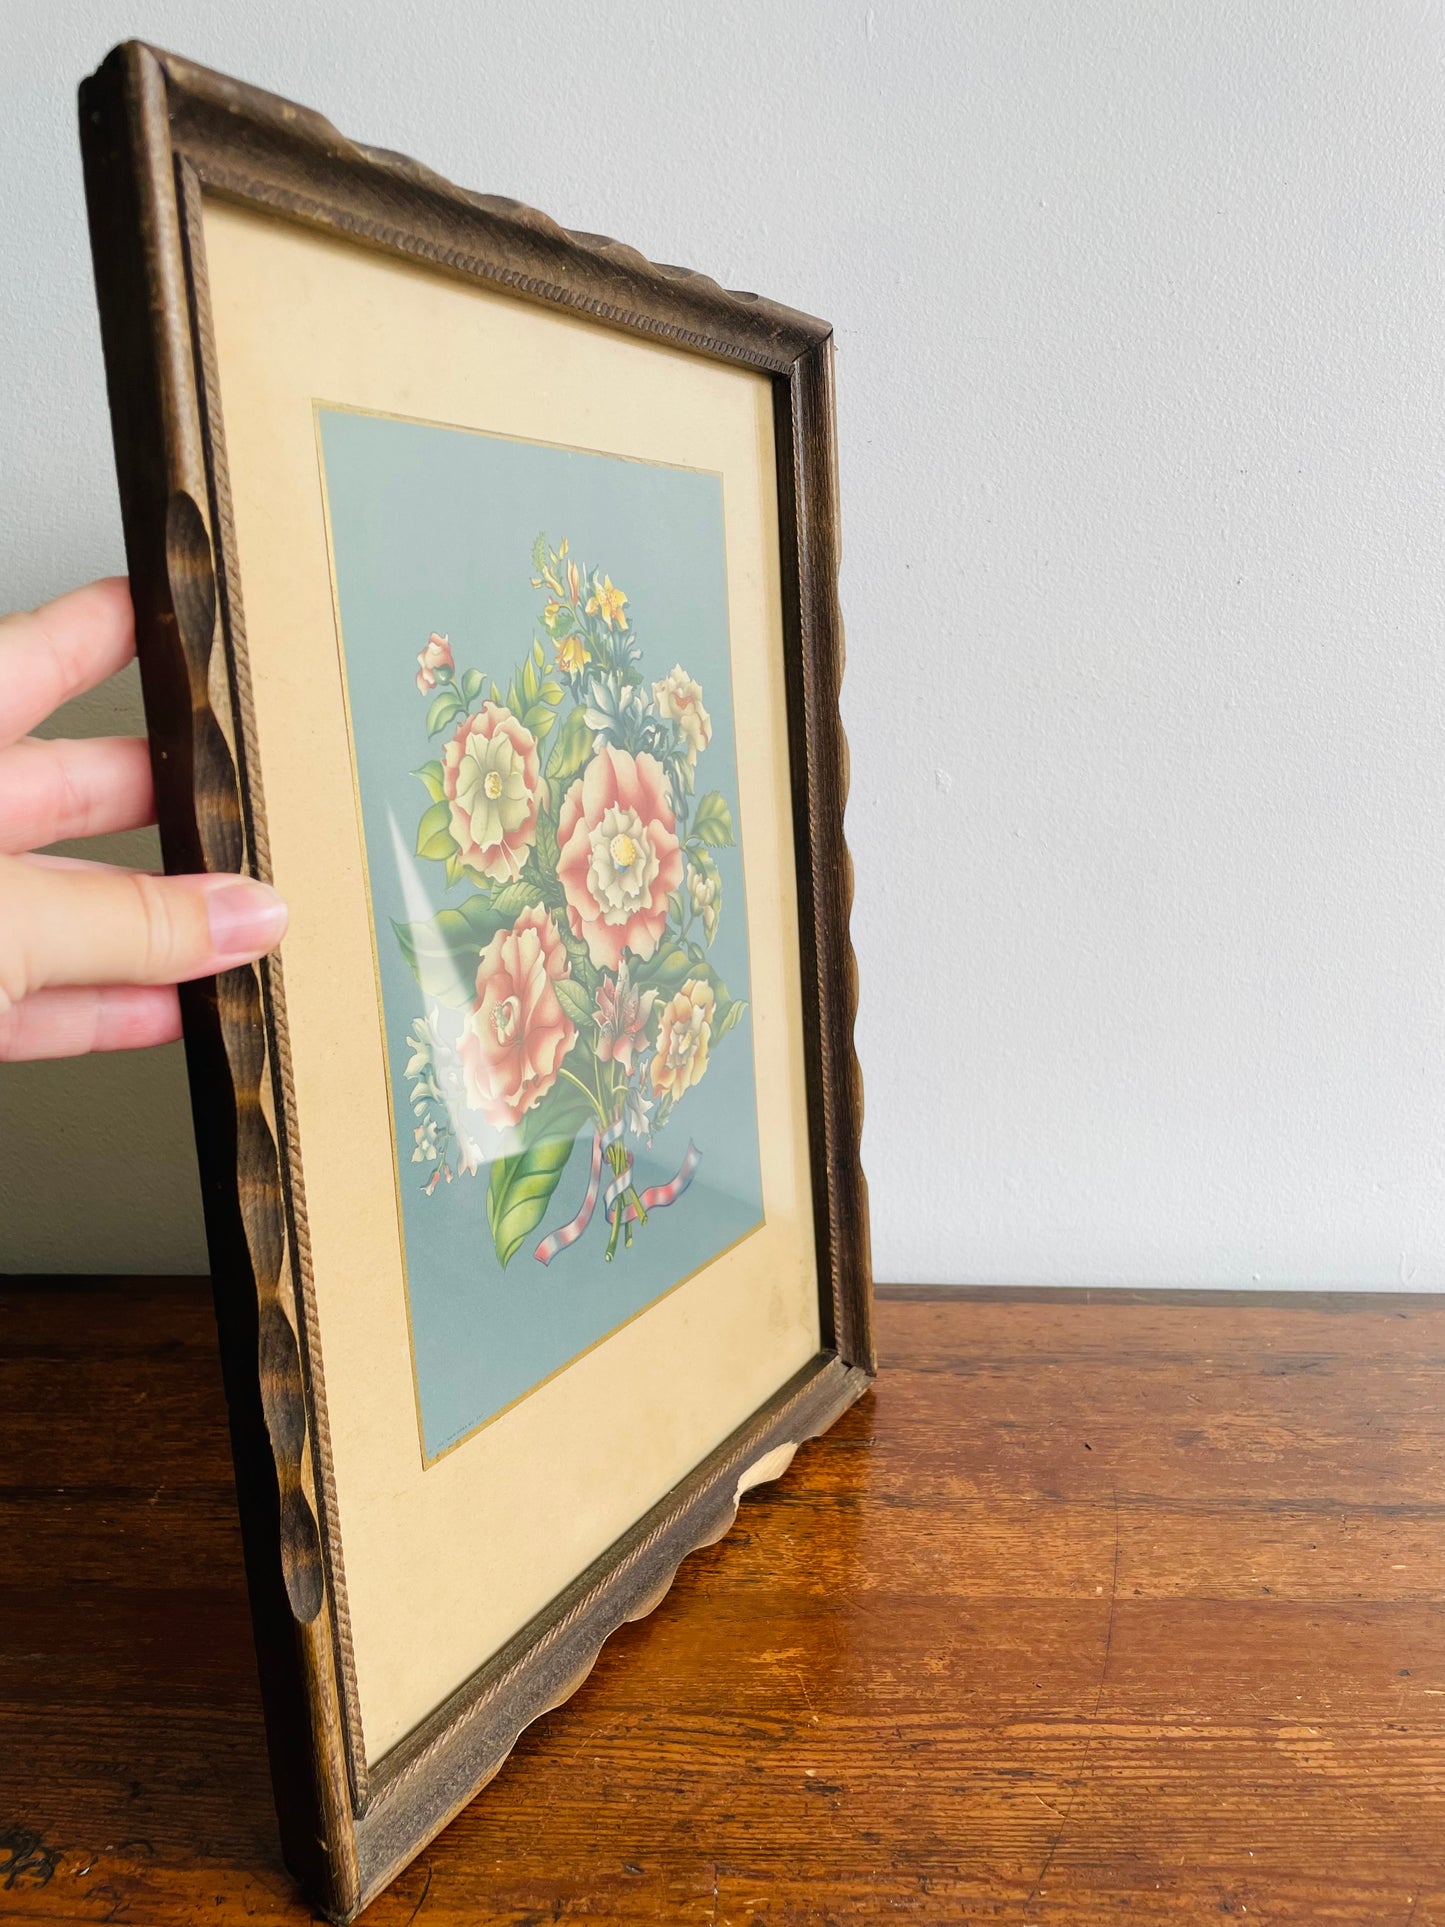 Framed Lithograph Print Picture of Flowers in Scalloped Wood Frame - New York No. 297